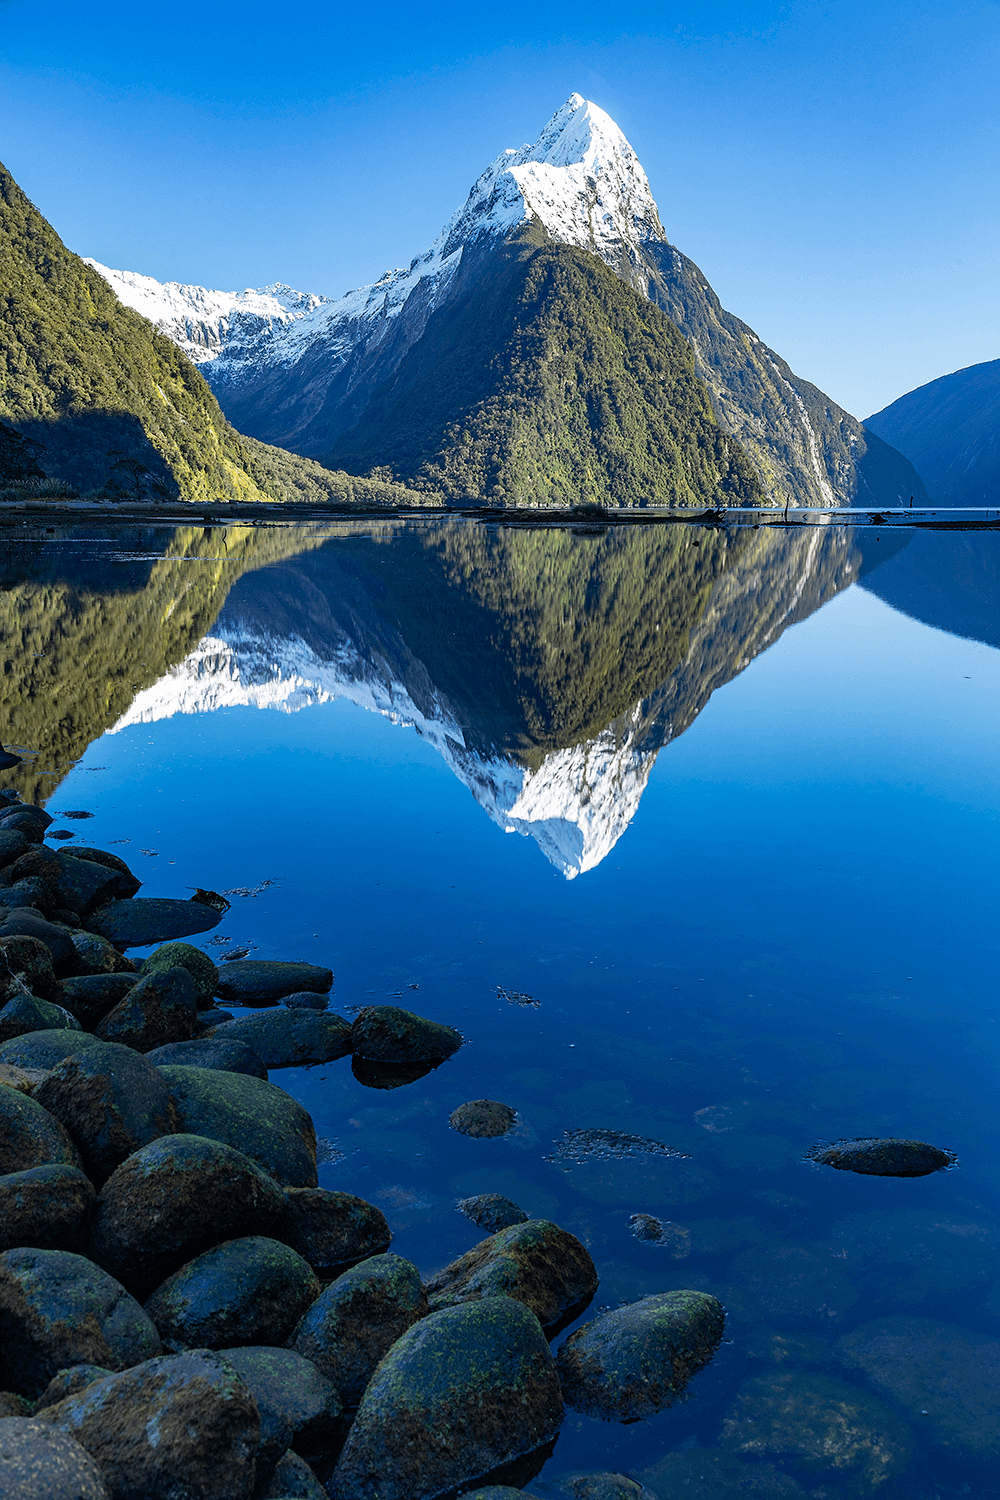 Image of New Zealand mountains by @Jamessmartphotography